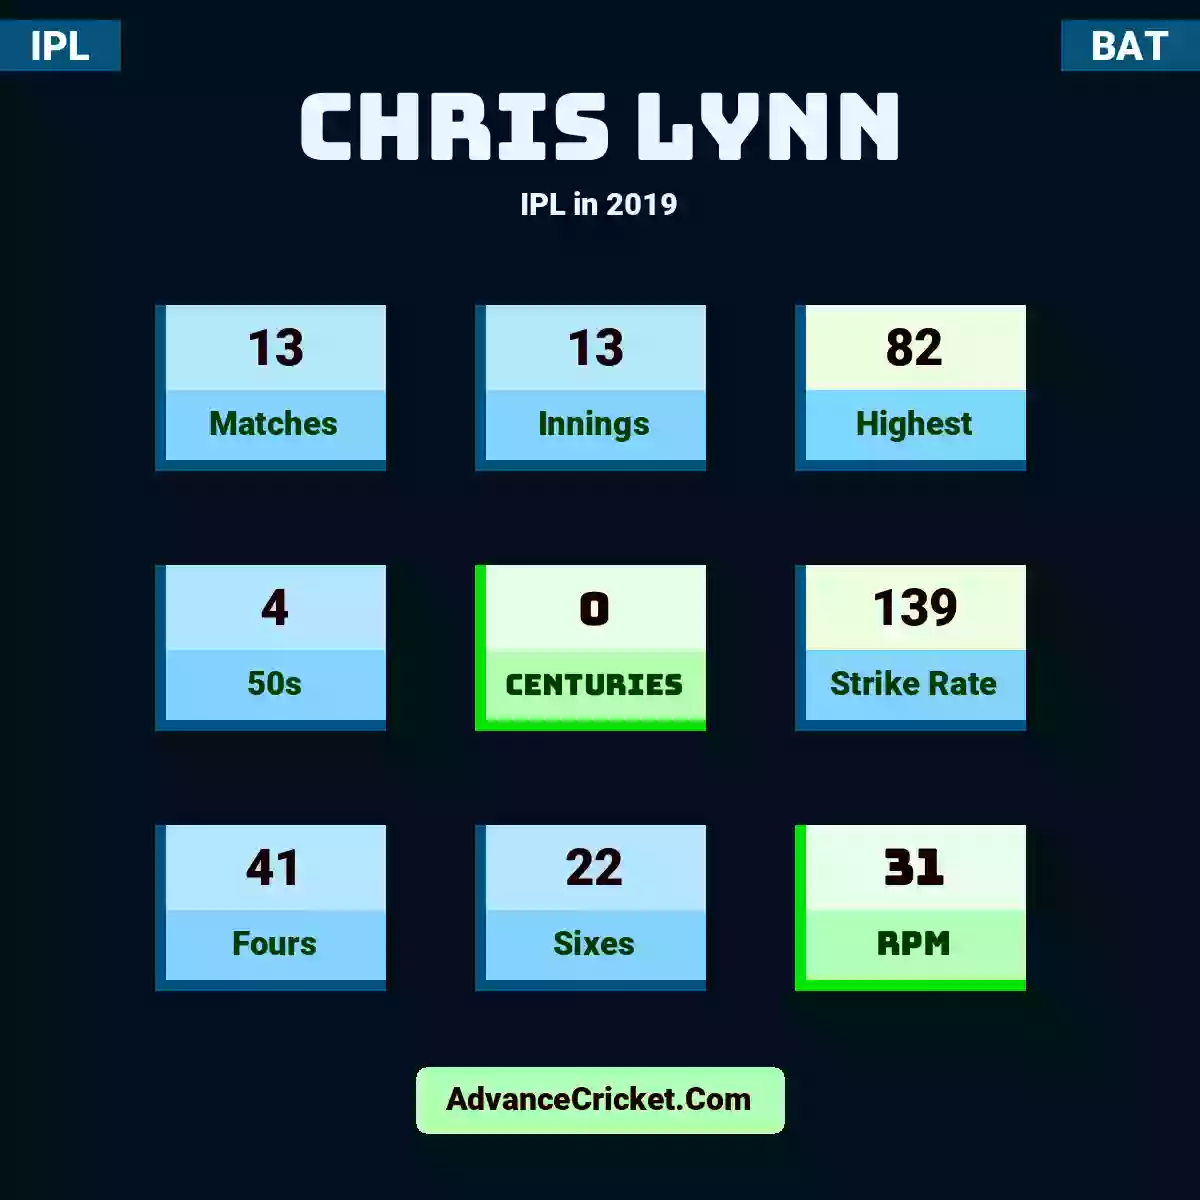 Chris Lynn IPL  in 2019, Chris Lynn played 13 matches, scored 82 runs as highest, 4 half-centuries, and 0 centuries, with a strike rate of 139. C.Lynn hit 41 fours and 22 sixes, with an RPM of 31.